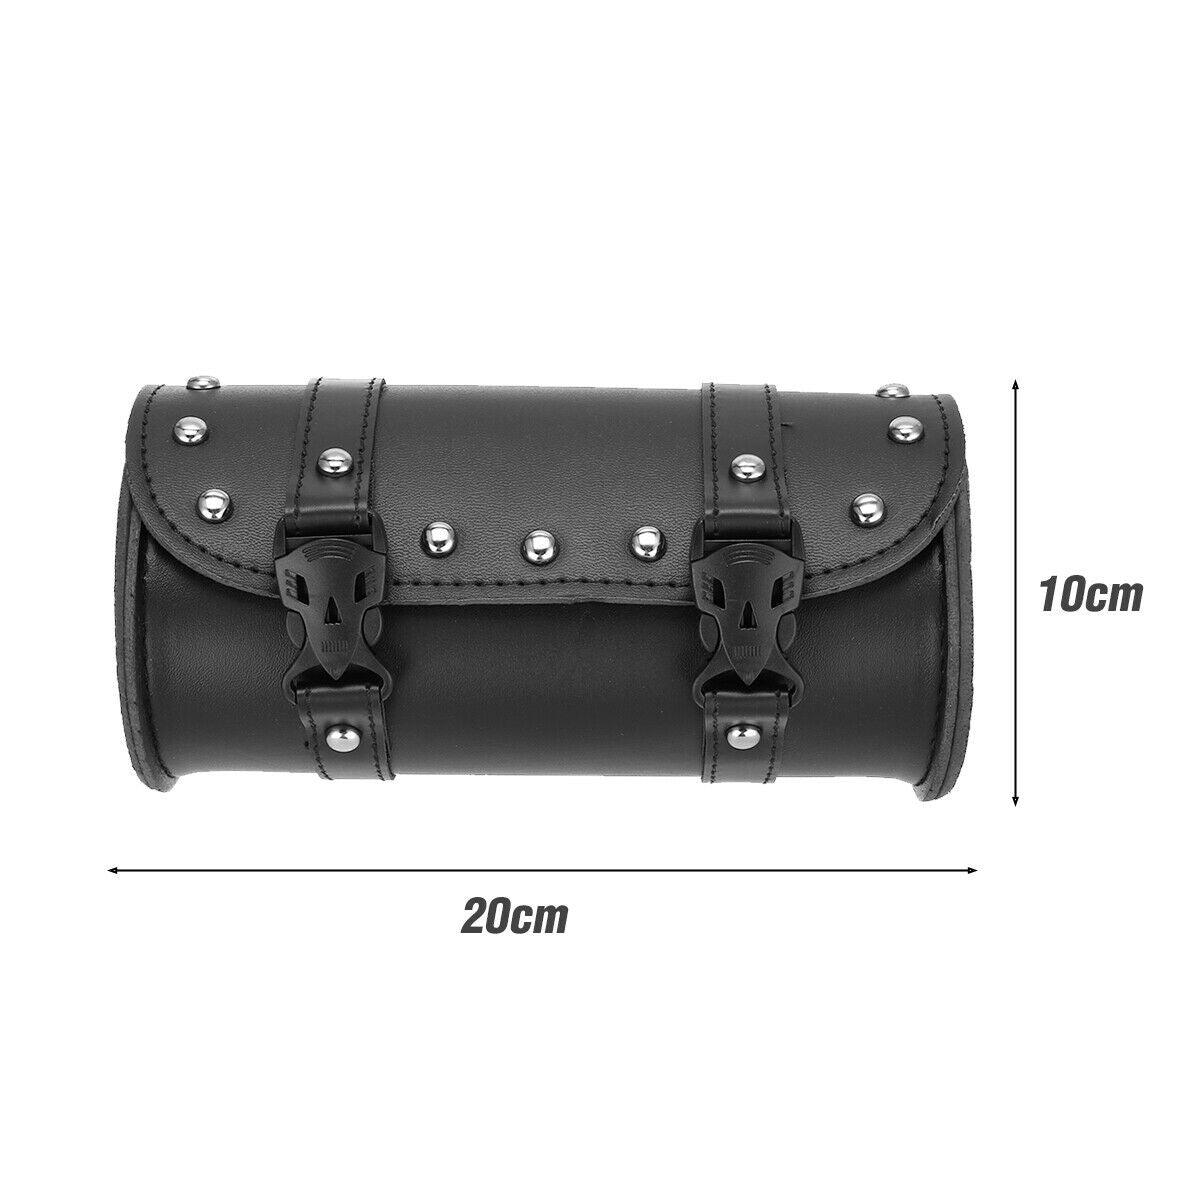 Black Motorcycle Front Fork Tool Bag Pouch Storage Luggage Saddle Bag Leather - Moto Life Products